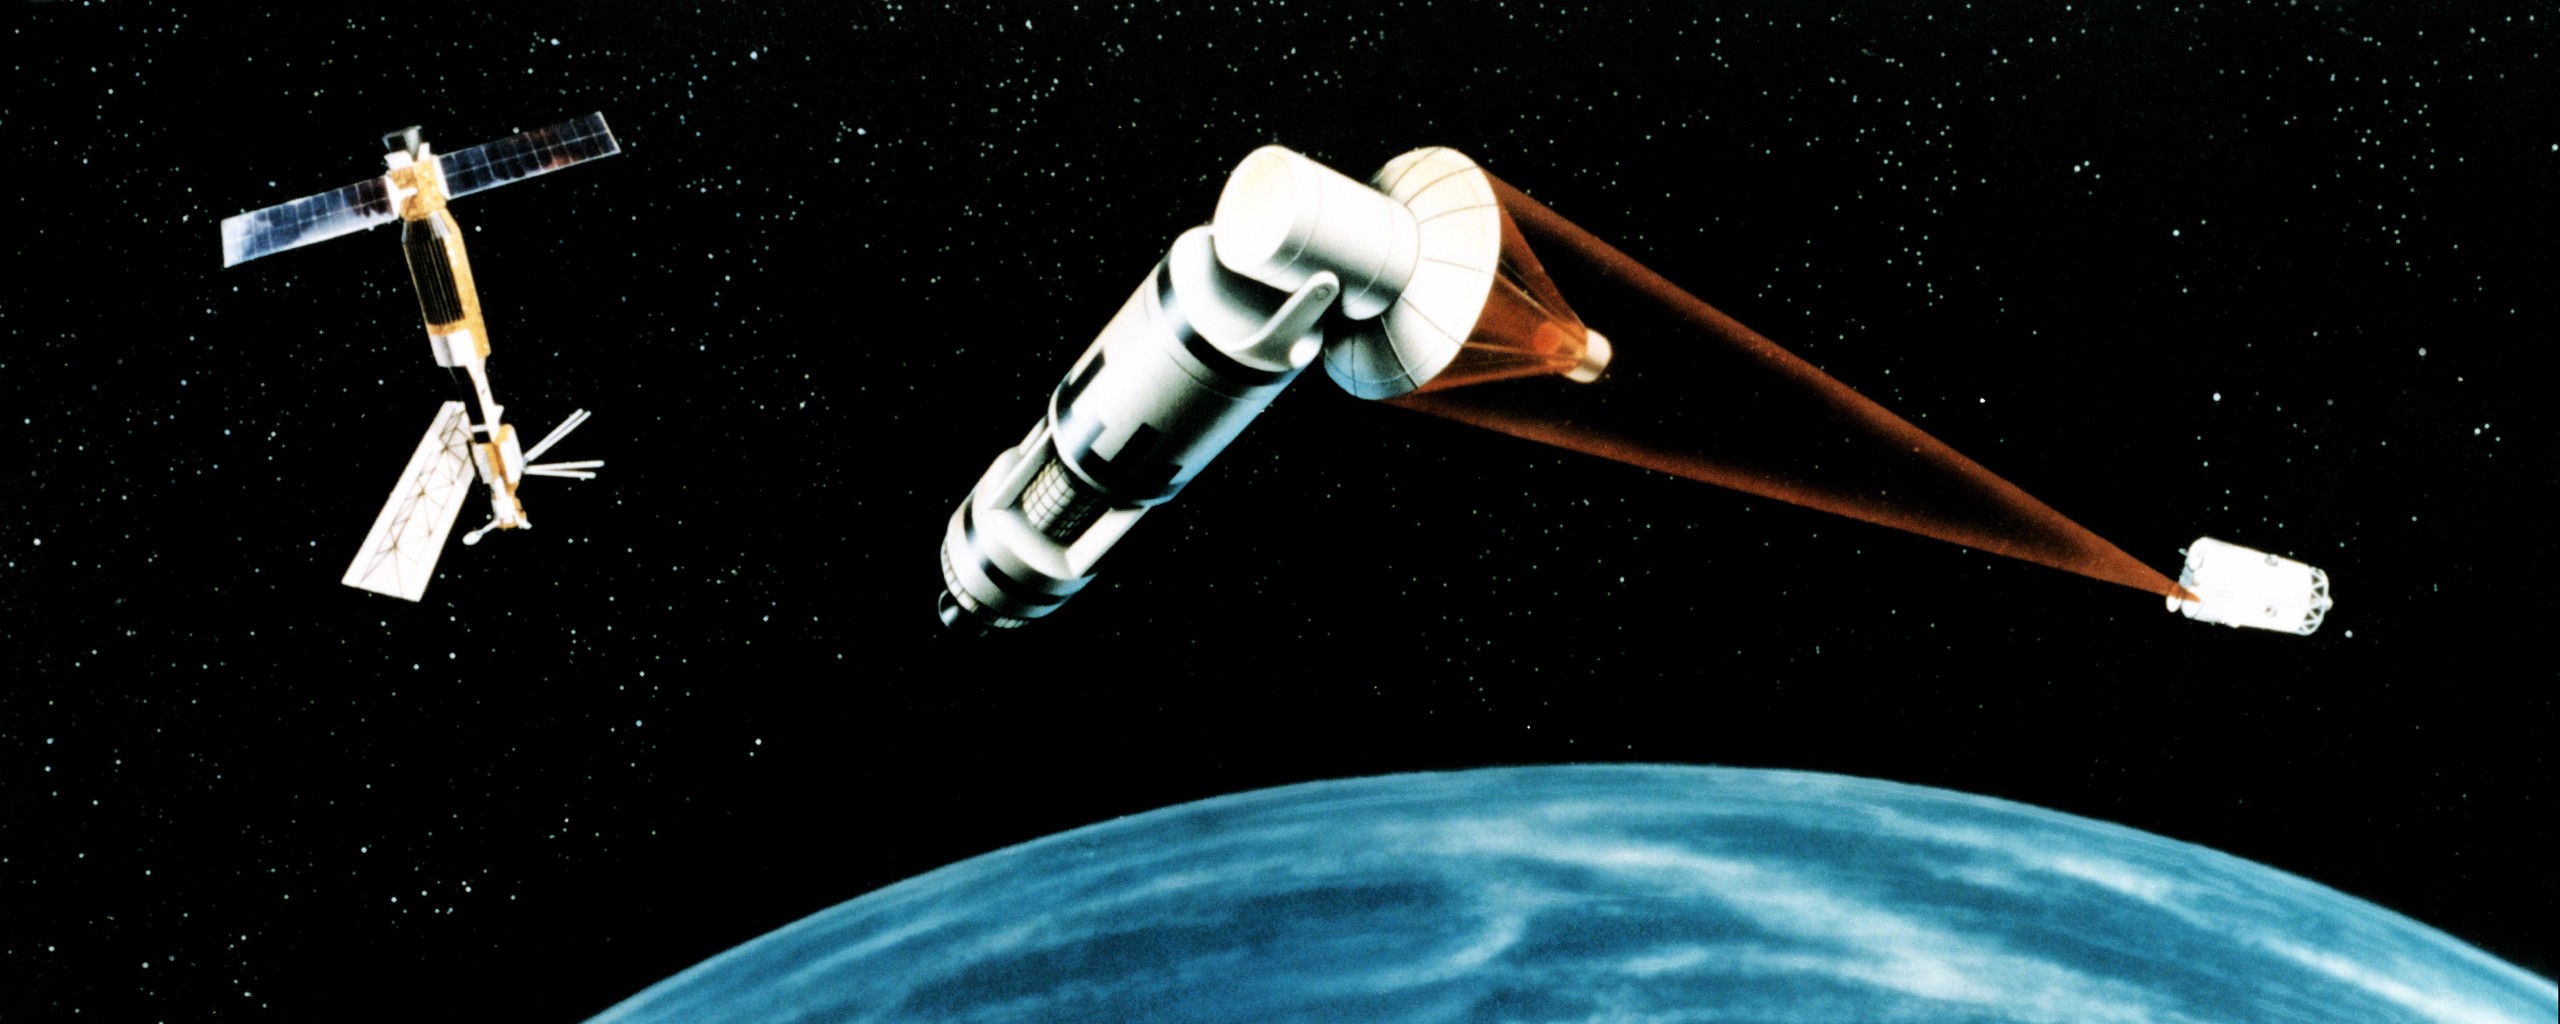 Lasers firing at space debris from a satellite.